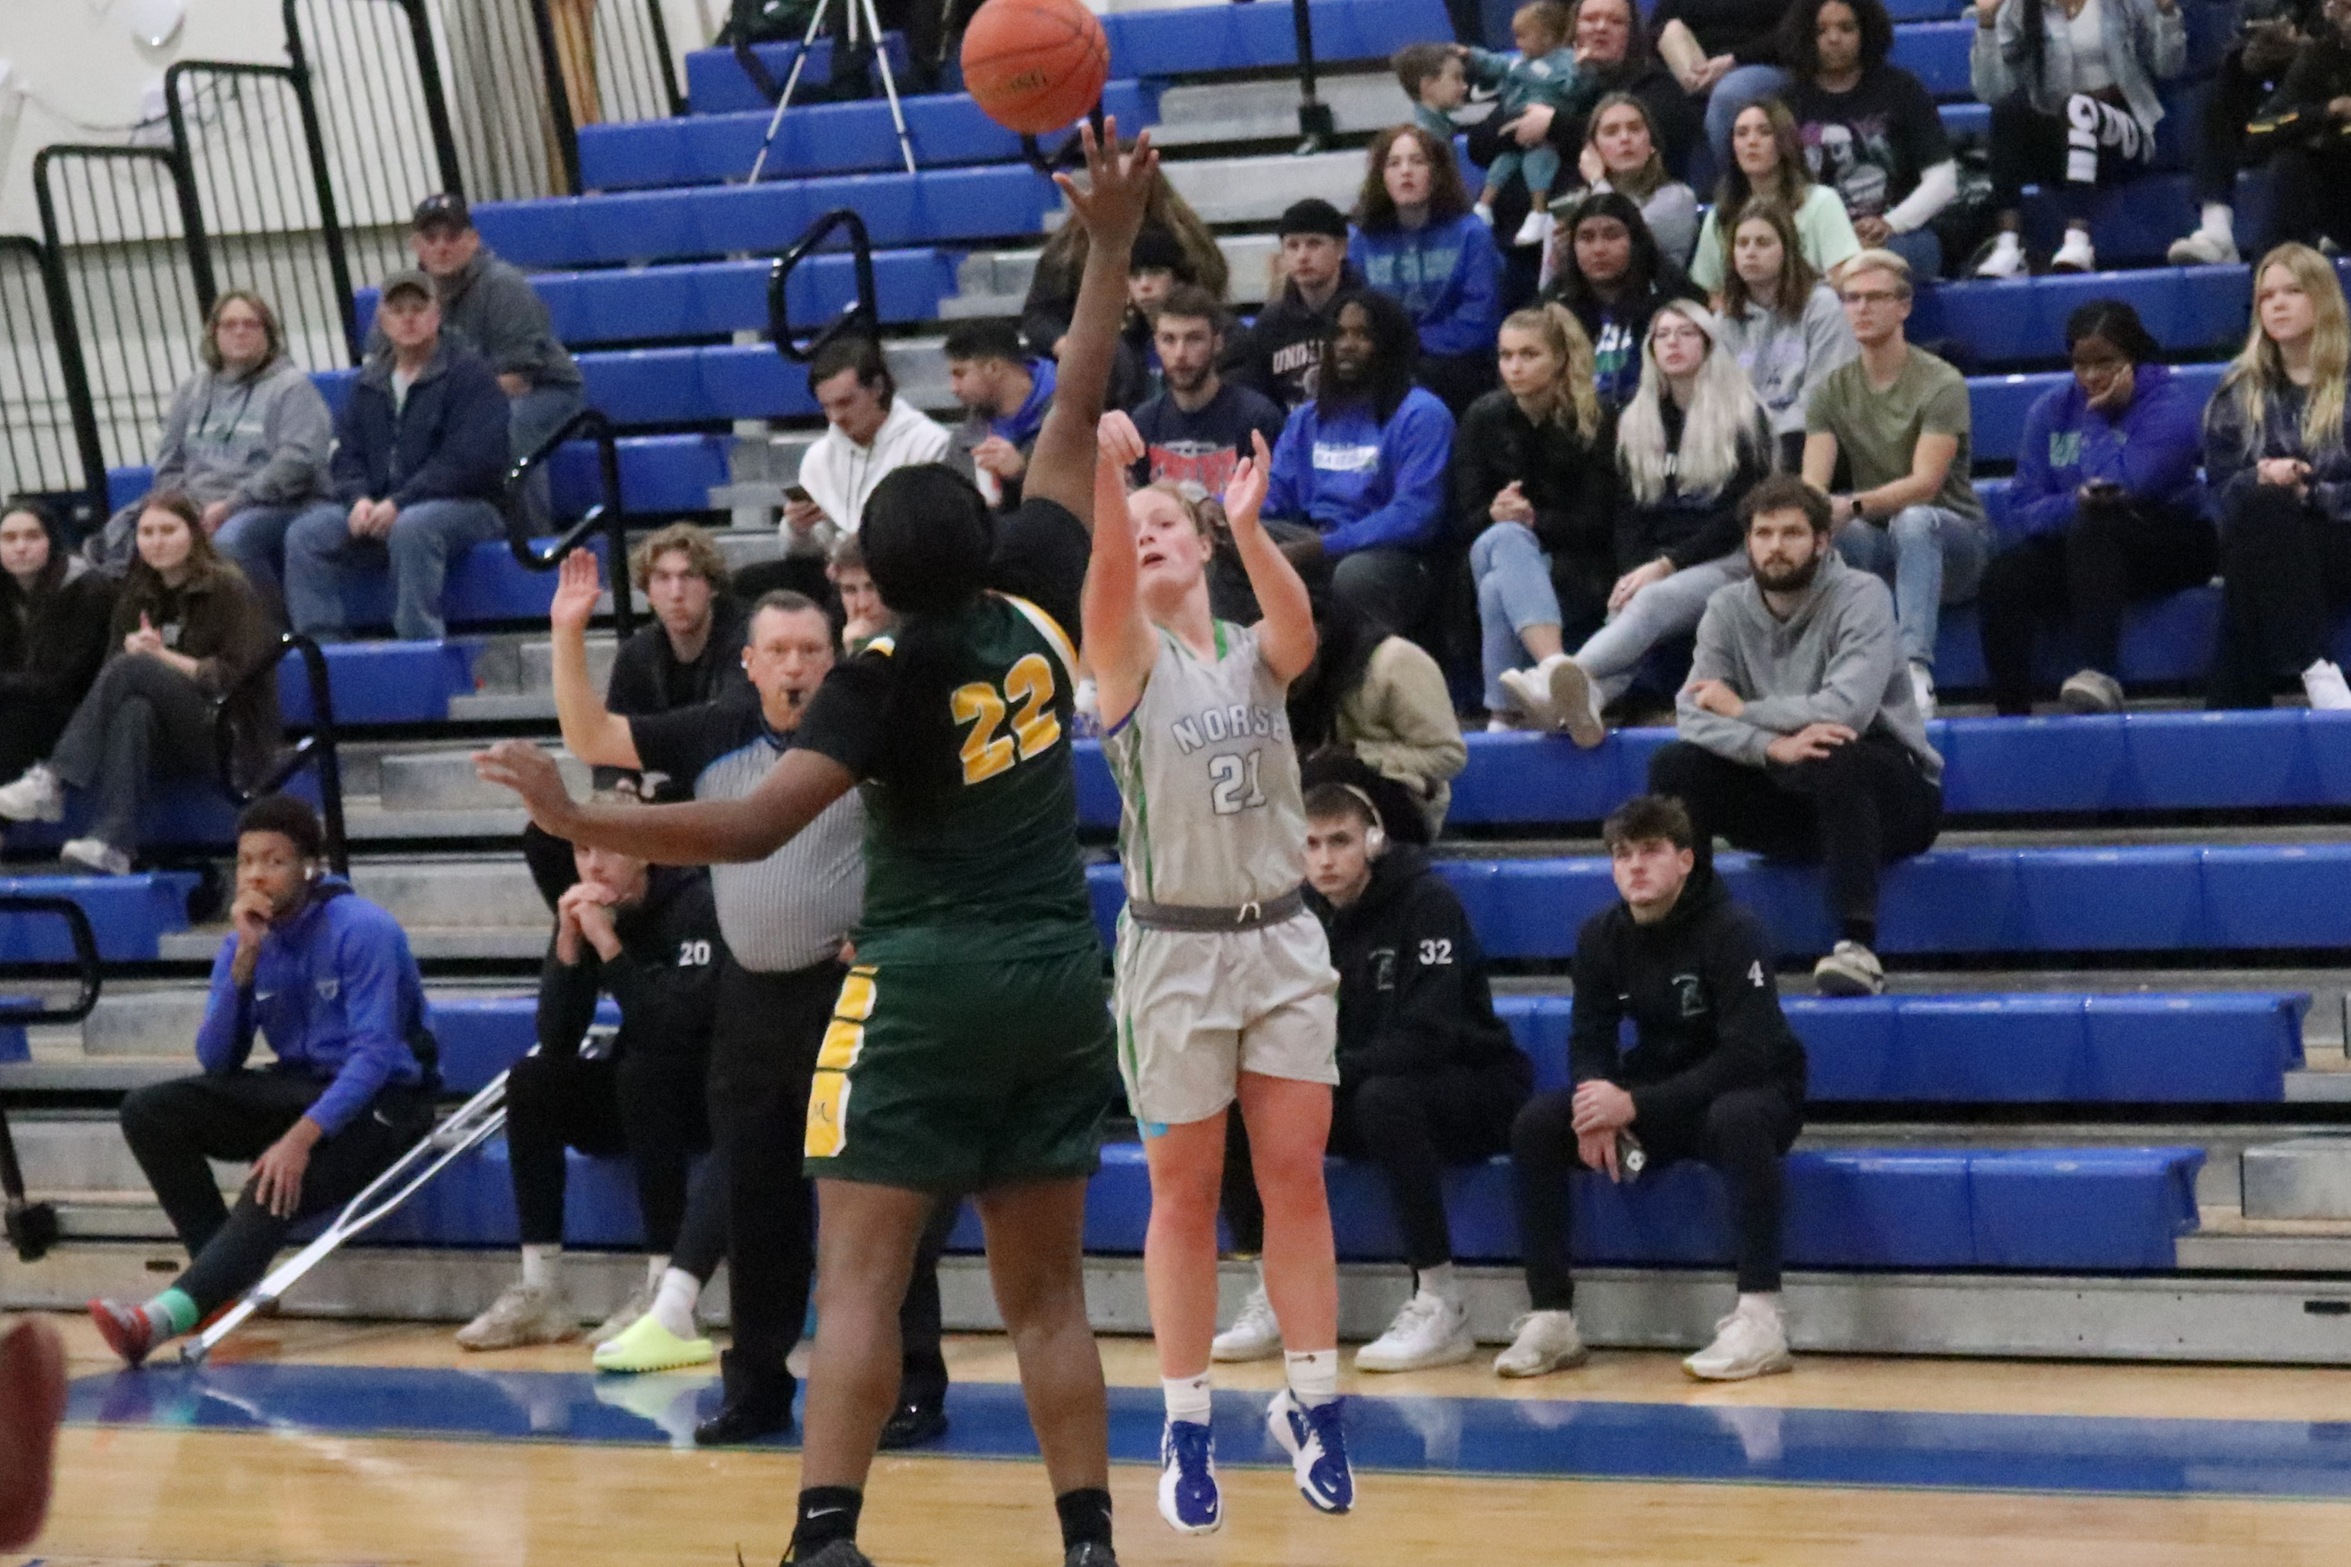 Alaina Trudeau shoots from three as the defender closes in